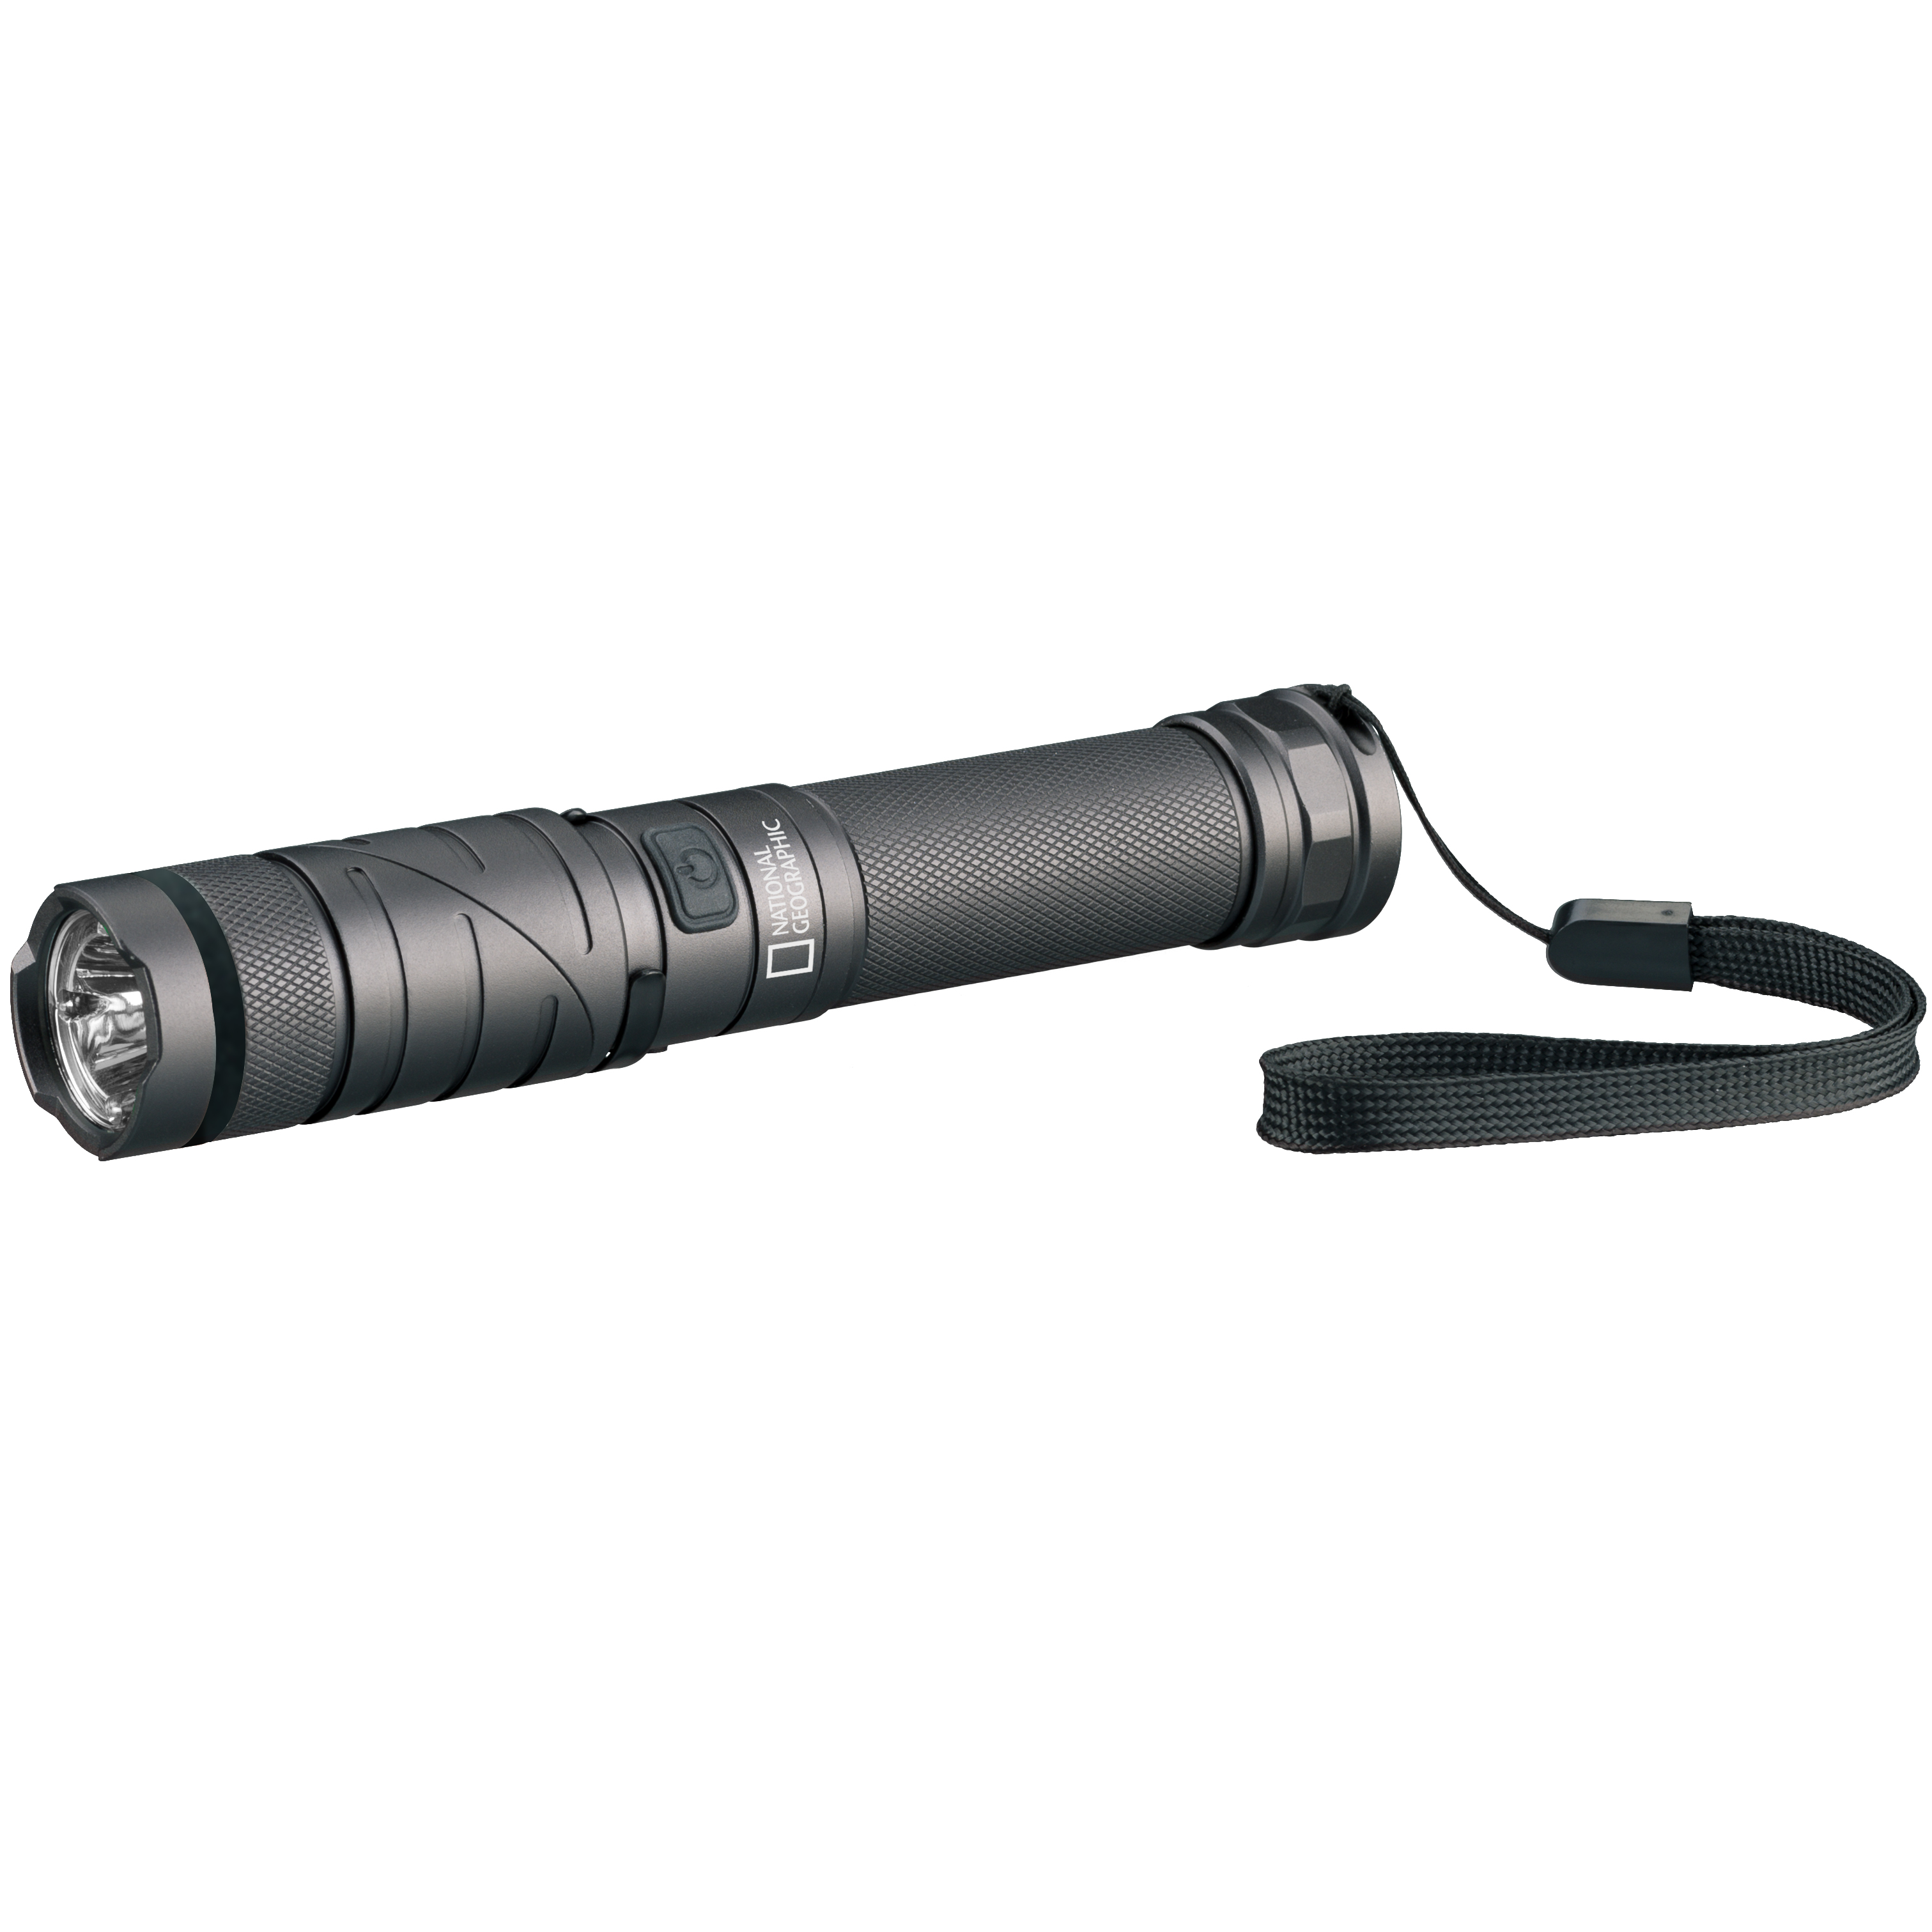 NATIONAL GEOGRAPHIC ILUMINOS 800 LED-Taschenlampe RG 800 lm